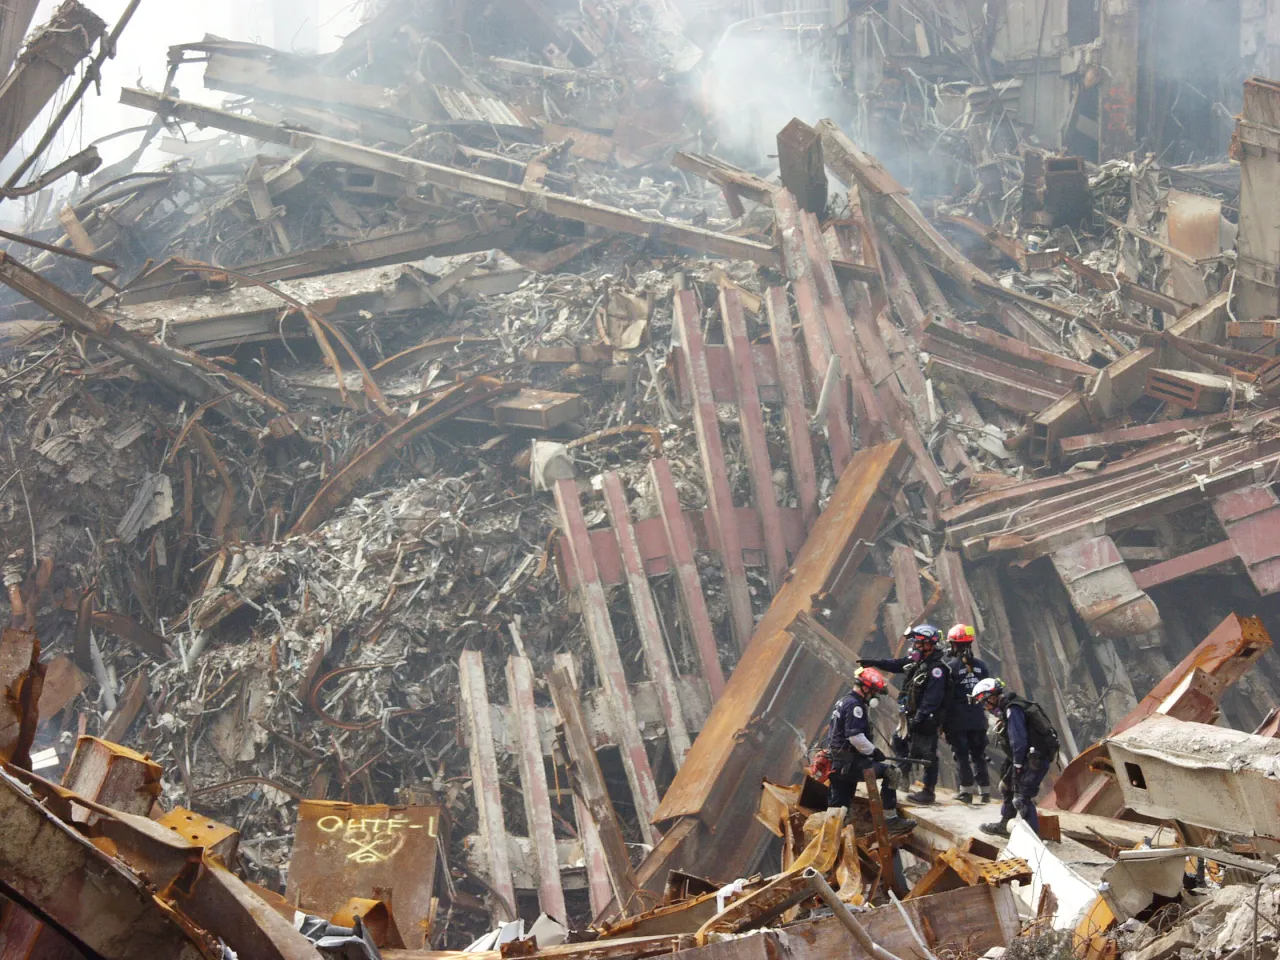 Image: 9/11 - Urban Search and Rescue teams continue to search for survivors amongst the wreckage at the World Trade Center (4)